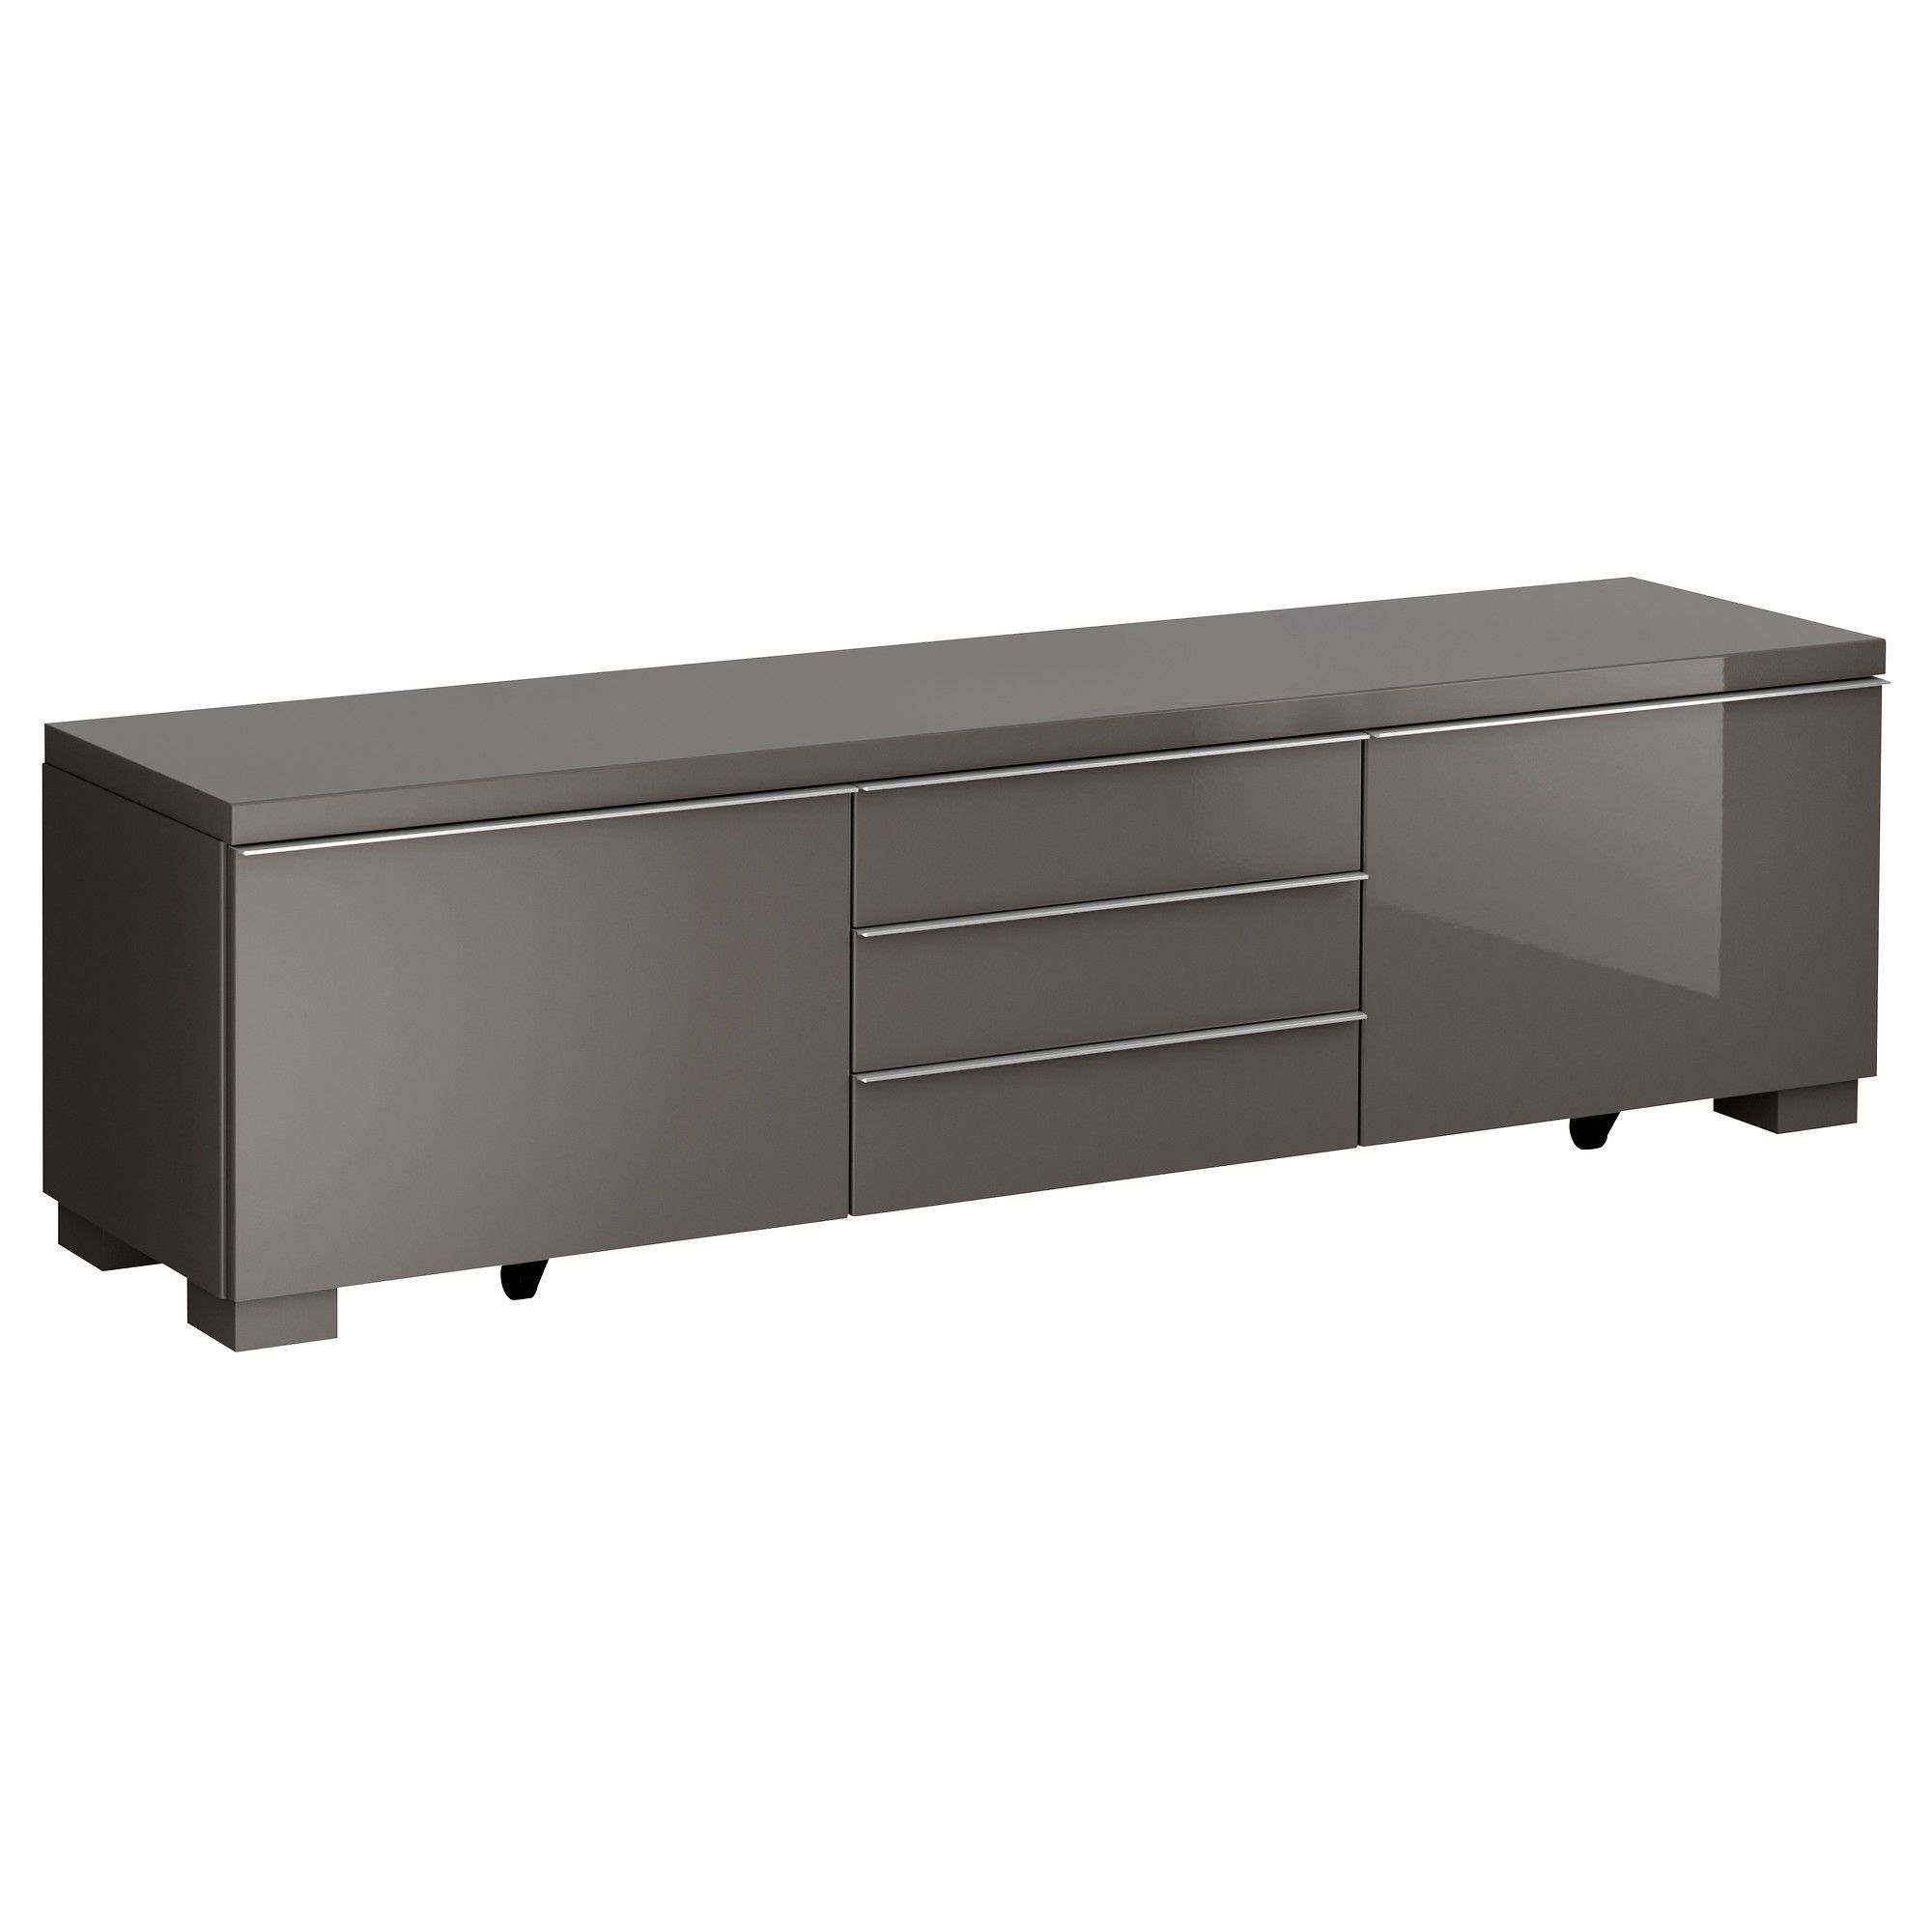 $249 Bestå Burs Tv Unit – High Gloss Gray – Ikea Dimensions: 70 7 Intended For Current Ikea White Gloss Tv Units (View 11 of 20)